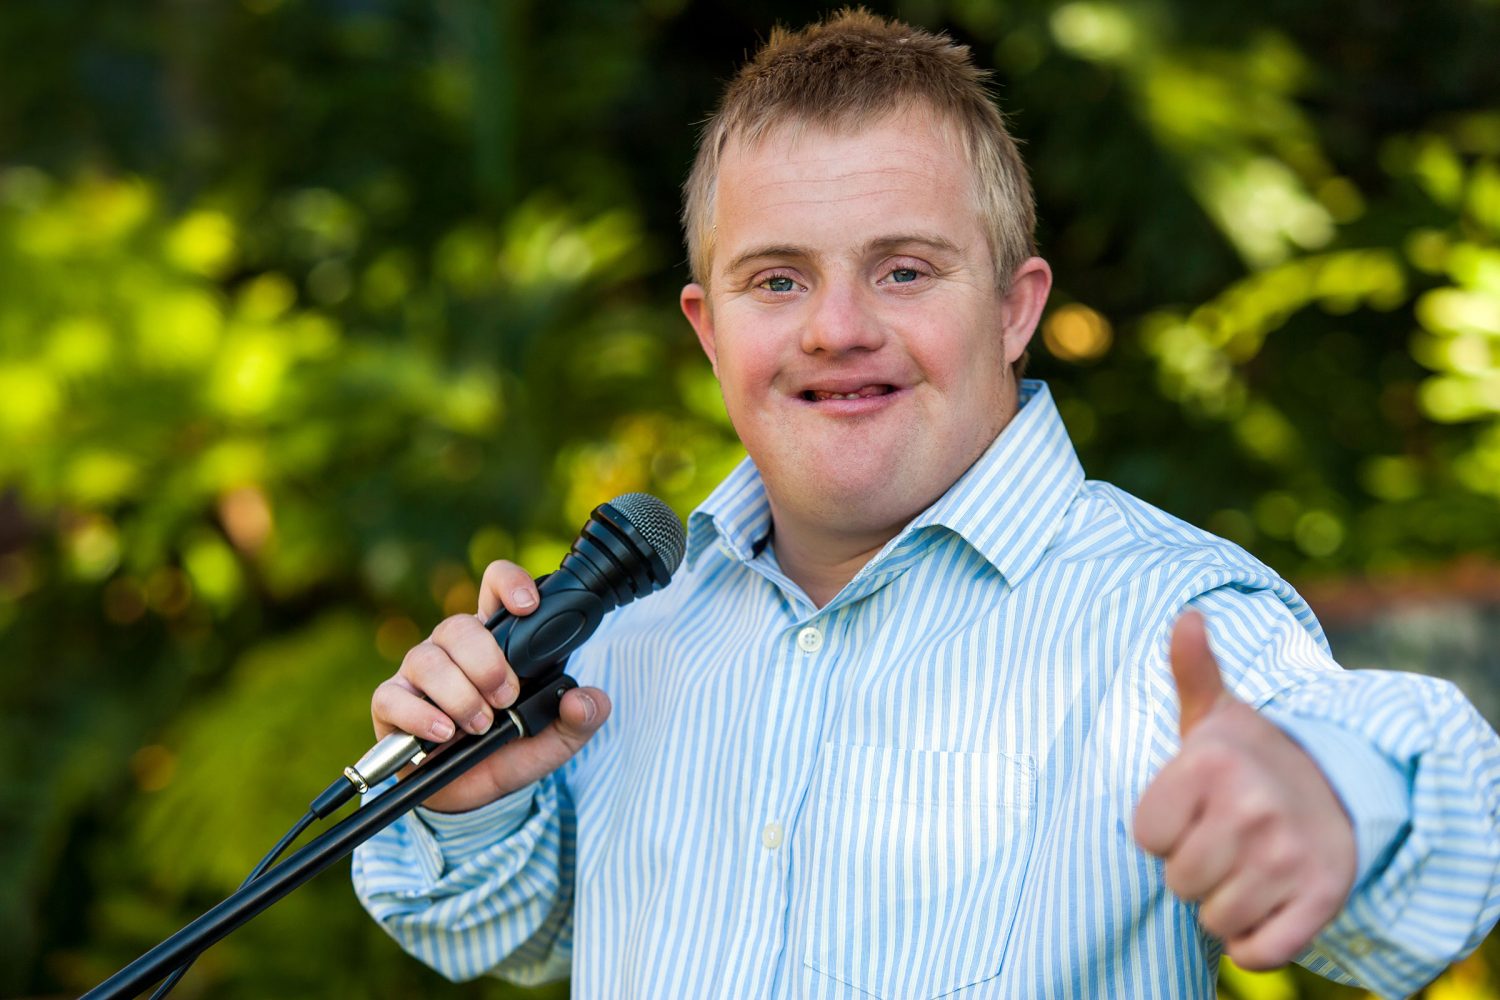 Man with Down syndrome sings with microphone